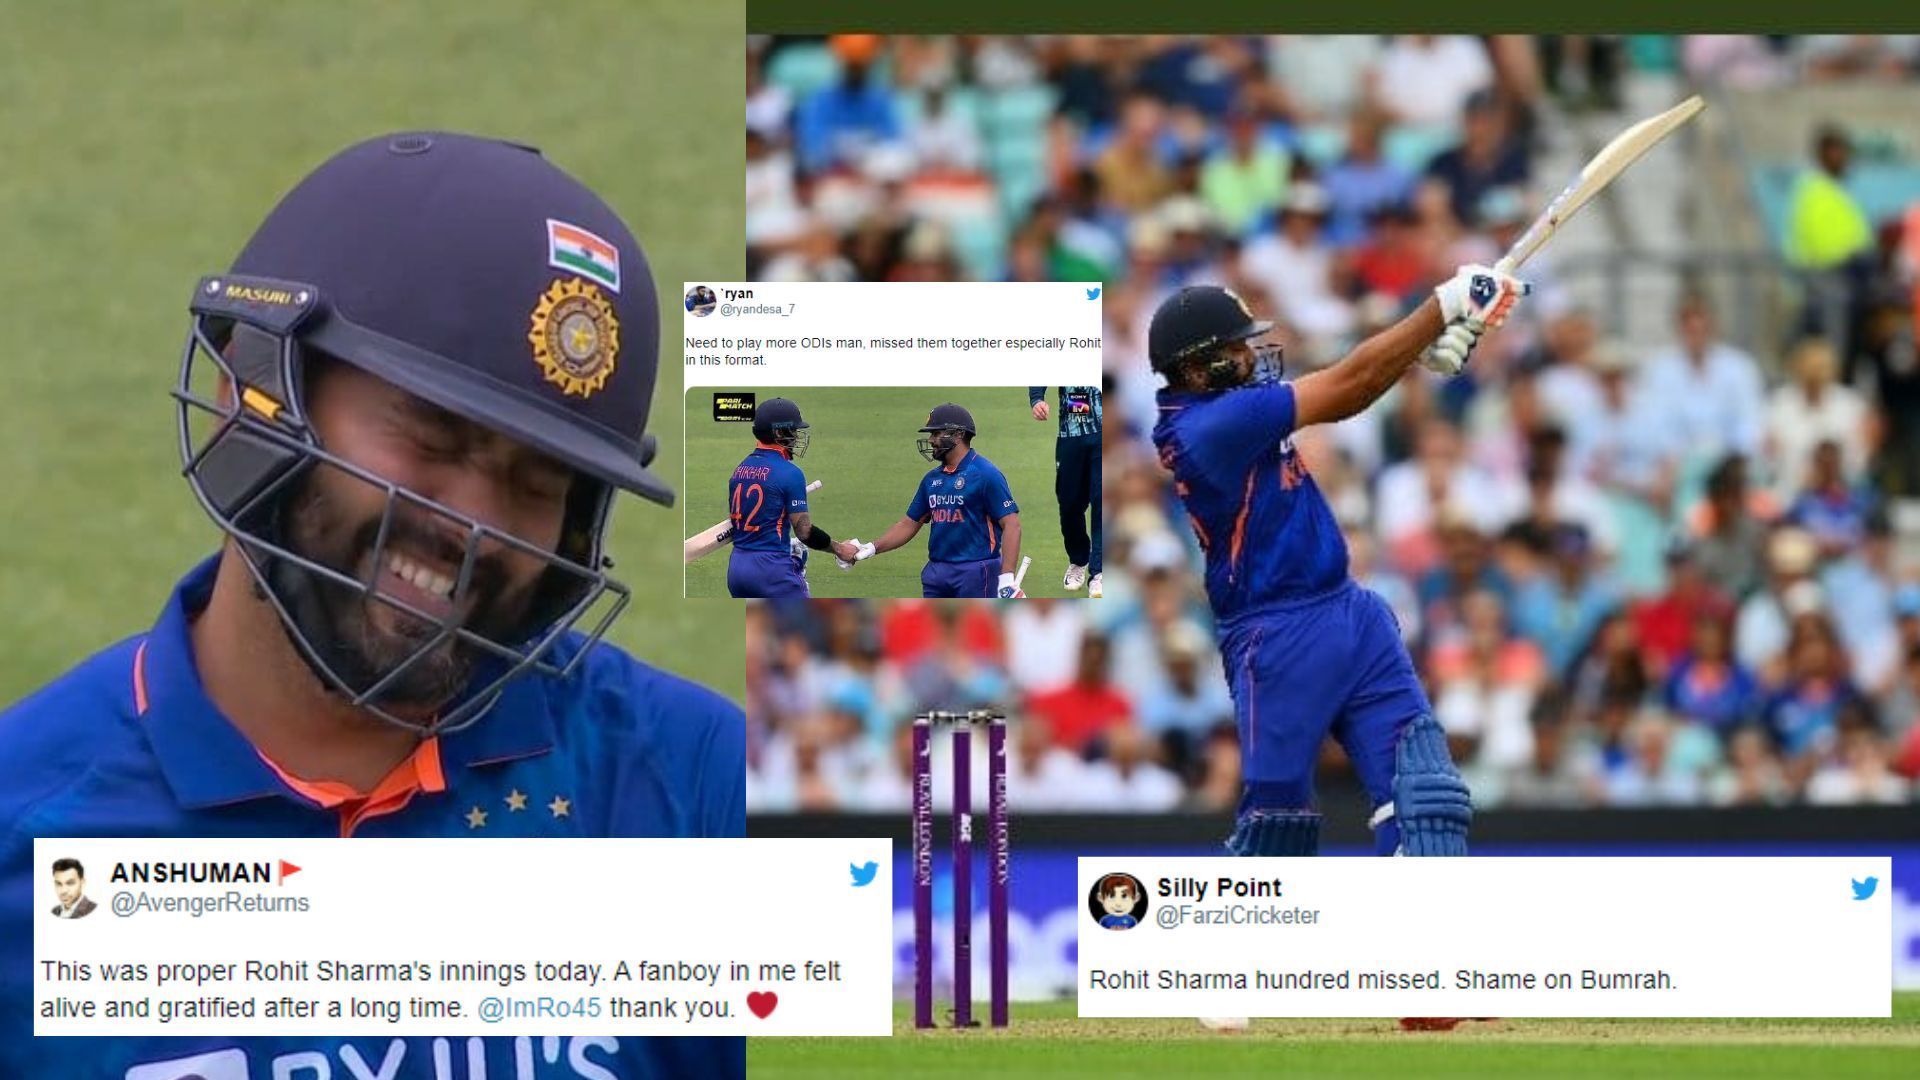 Rohit Sharma was absolutely on fire as his 76* helped India win comfortably. (P.C.:Twitter)